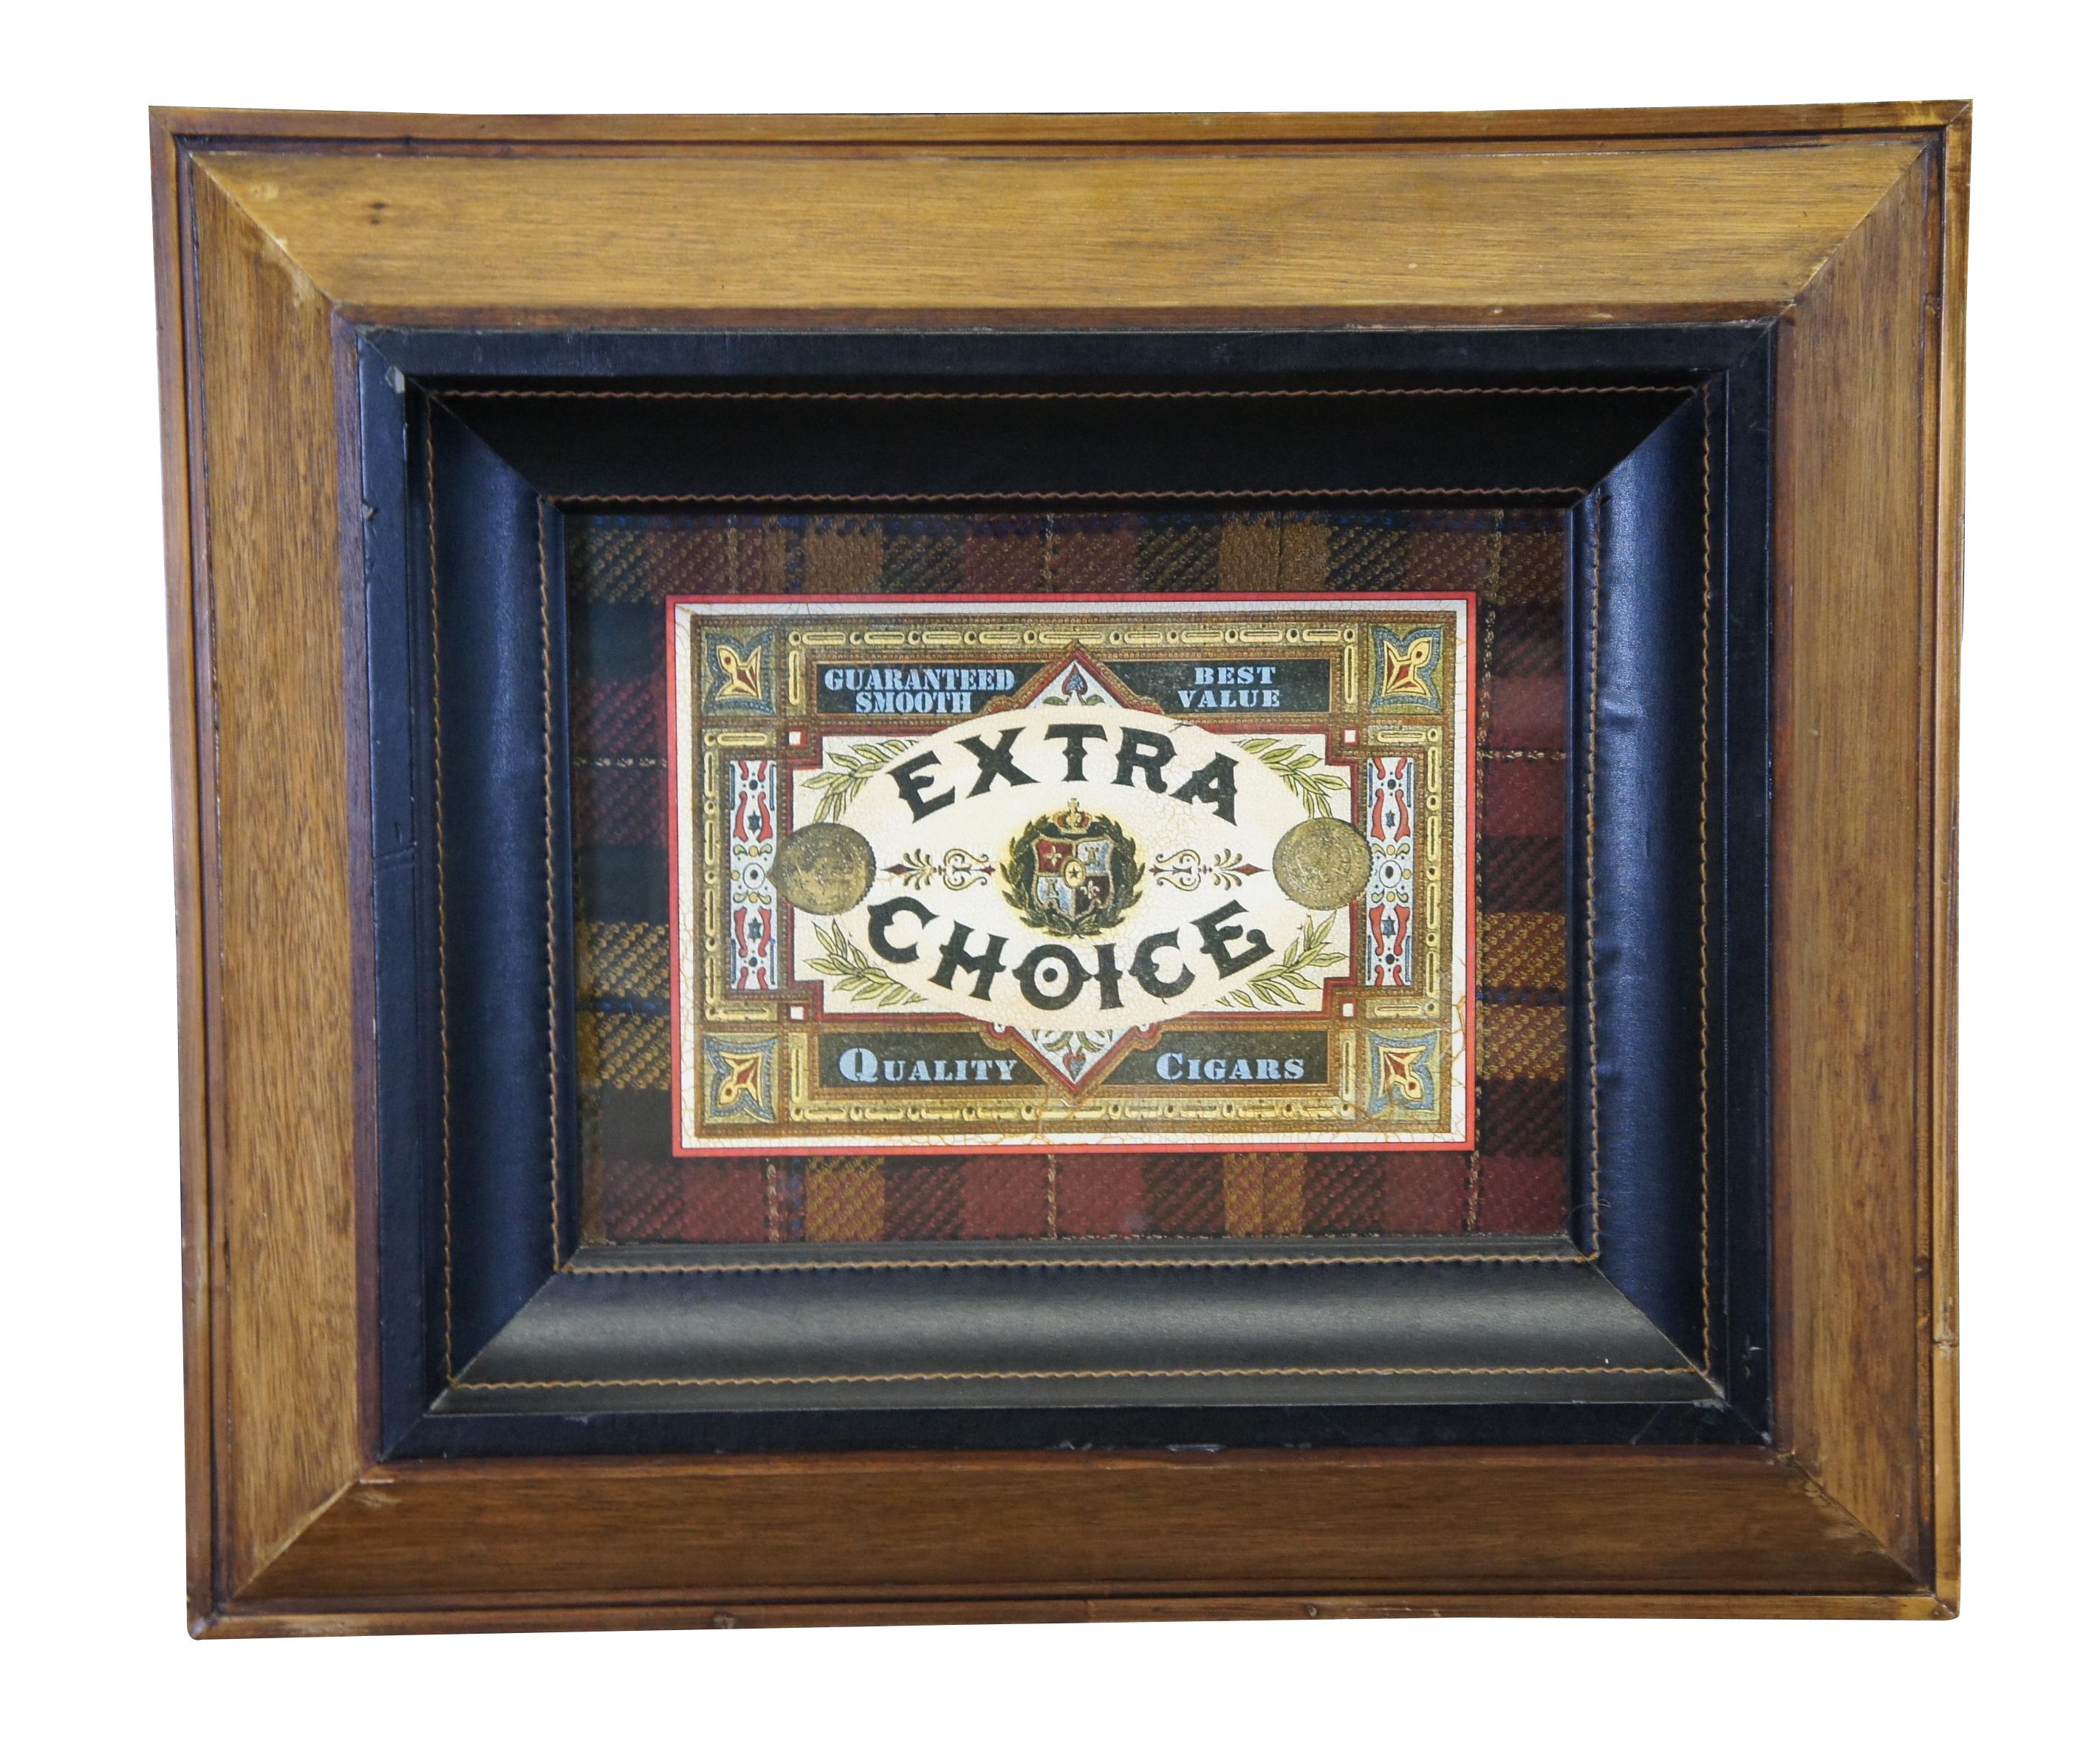 Bombay Company Cigar Wall Art.  El Matador & Extra Choice crackled labels with a plaid border and wooden frame.  Great for a man cave or bar

Dimensions: 
27